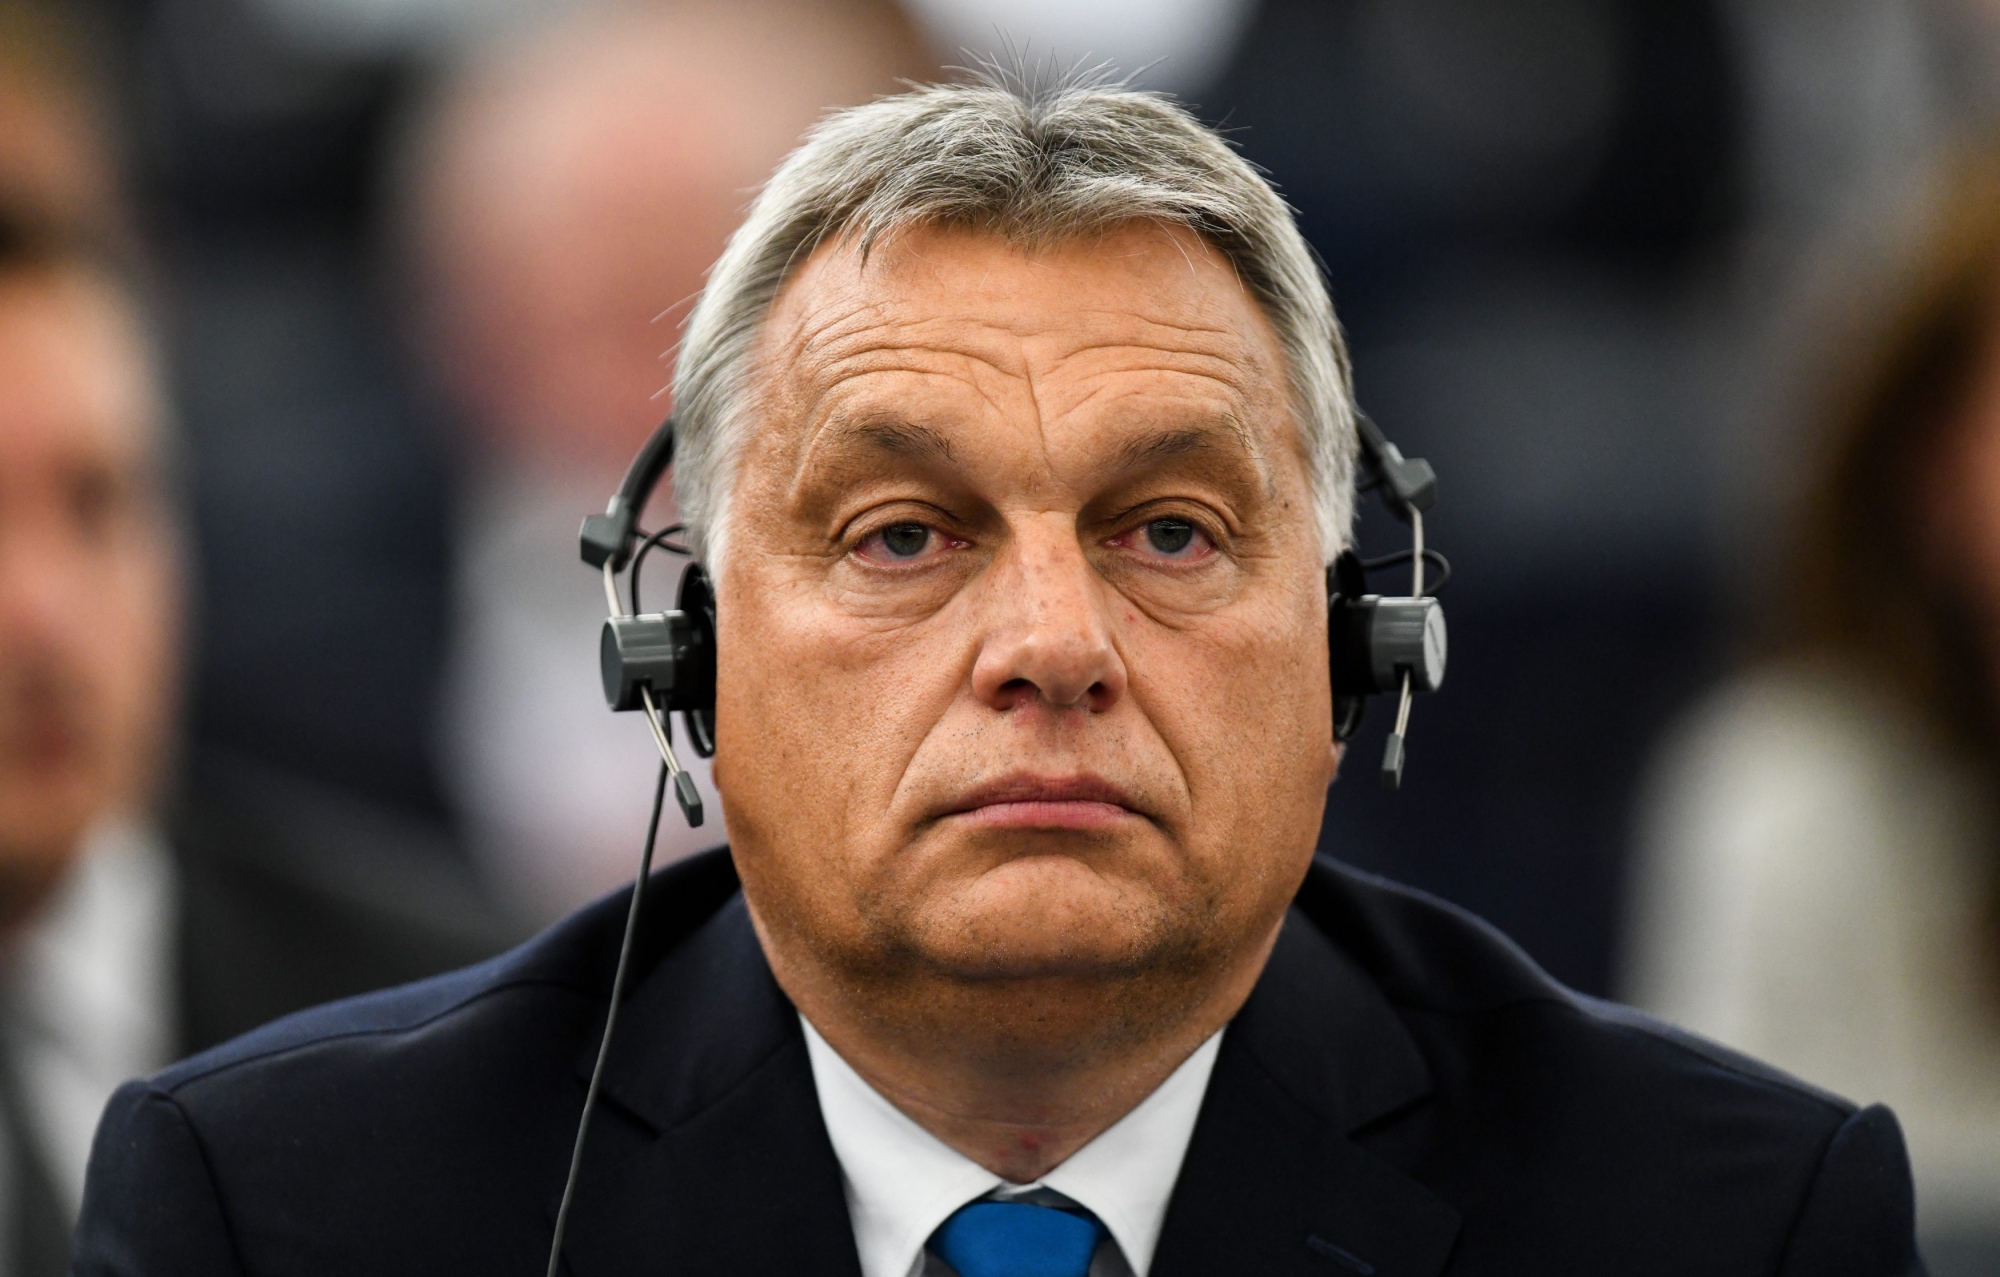 epa07012563 Hungarian Prime Minister Viktor Orban listens to a speech in the plenary session at the European Parliament in Strasbourg, France, 11 September 2018. In the afternoon, the European Parliament is debating a report by Greens MP Judith Sargentini. Among other things, the government in Budapest should curtail the rights of minorities, dissenters and journalists, damage the independence of the judiciary and restrict religious freedom.  EPA/PATRICK SEEGER FRANCE EU PARLIAMENT